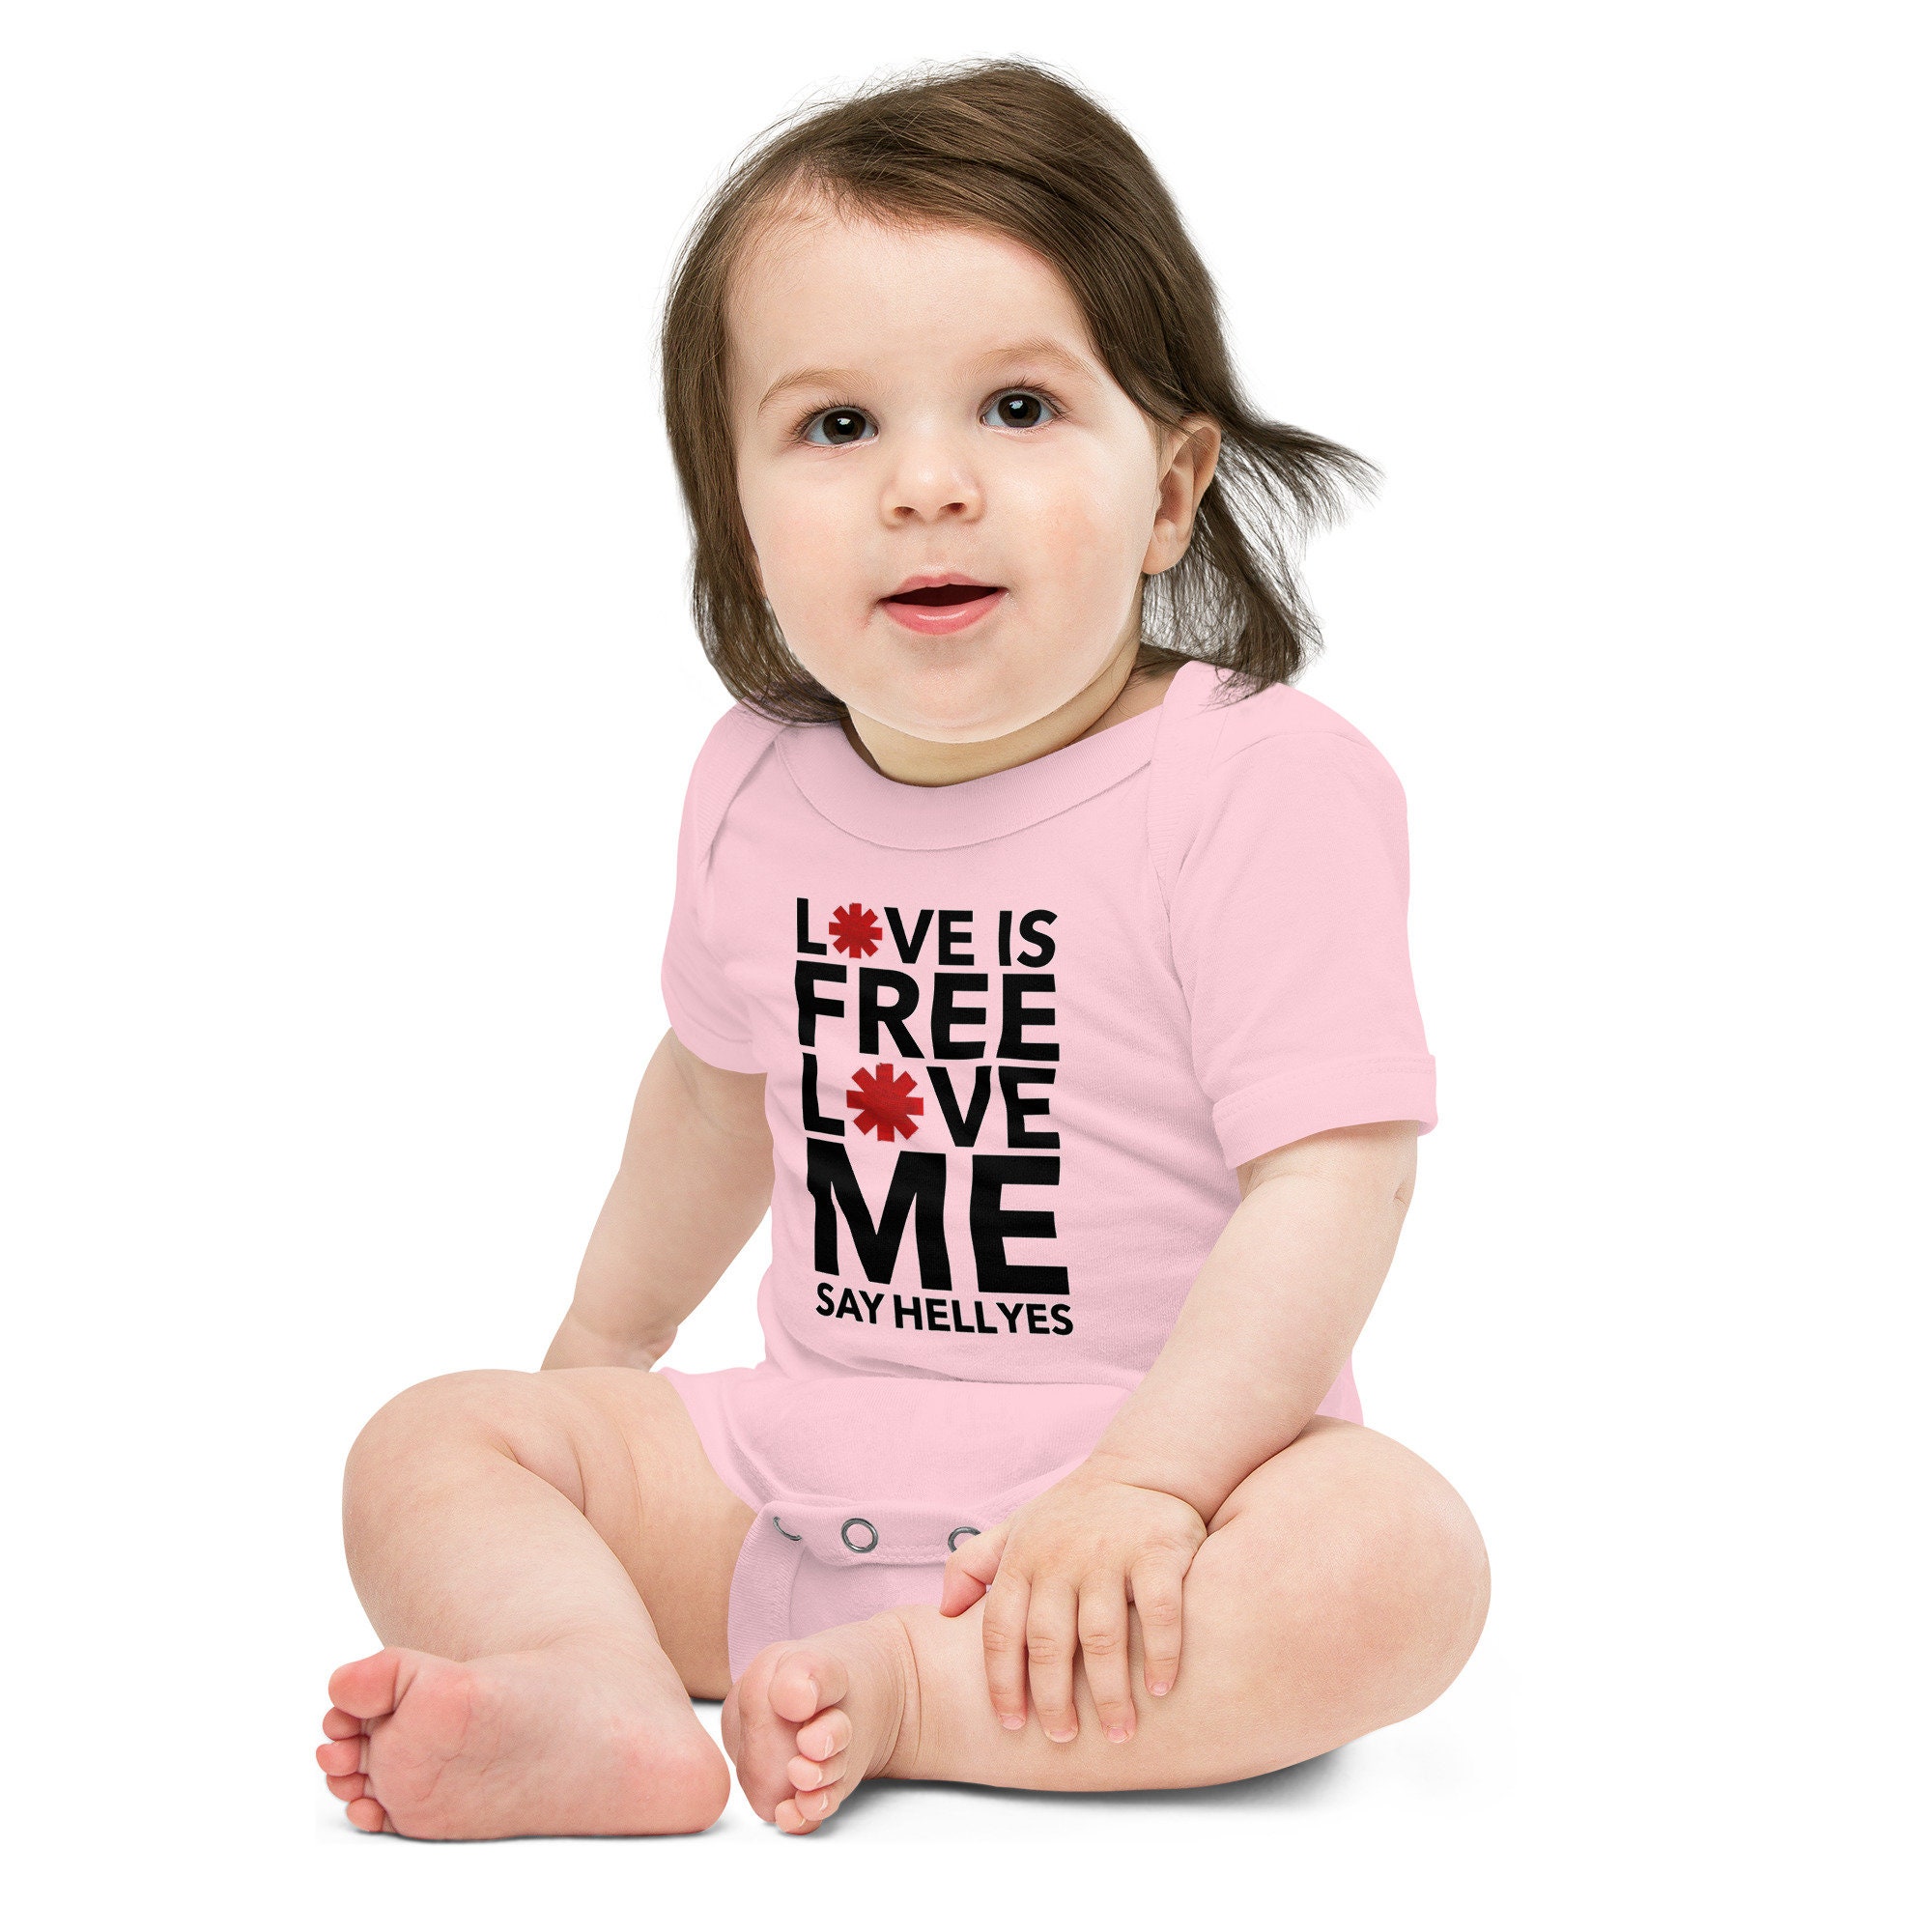 Red Hot Chili Peppers Give It Away Lyrics Baby Onesie